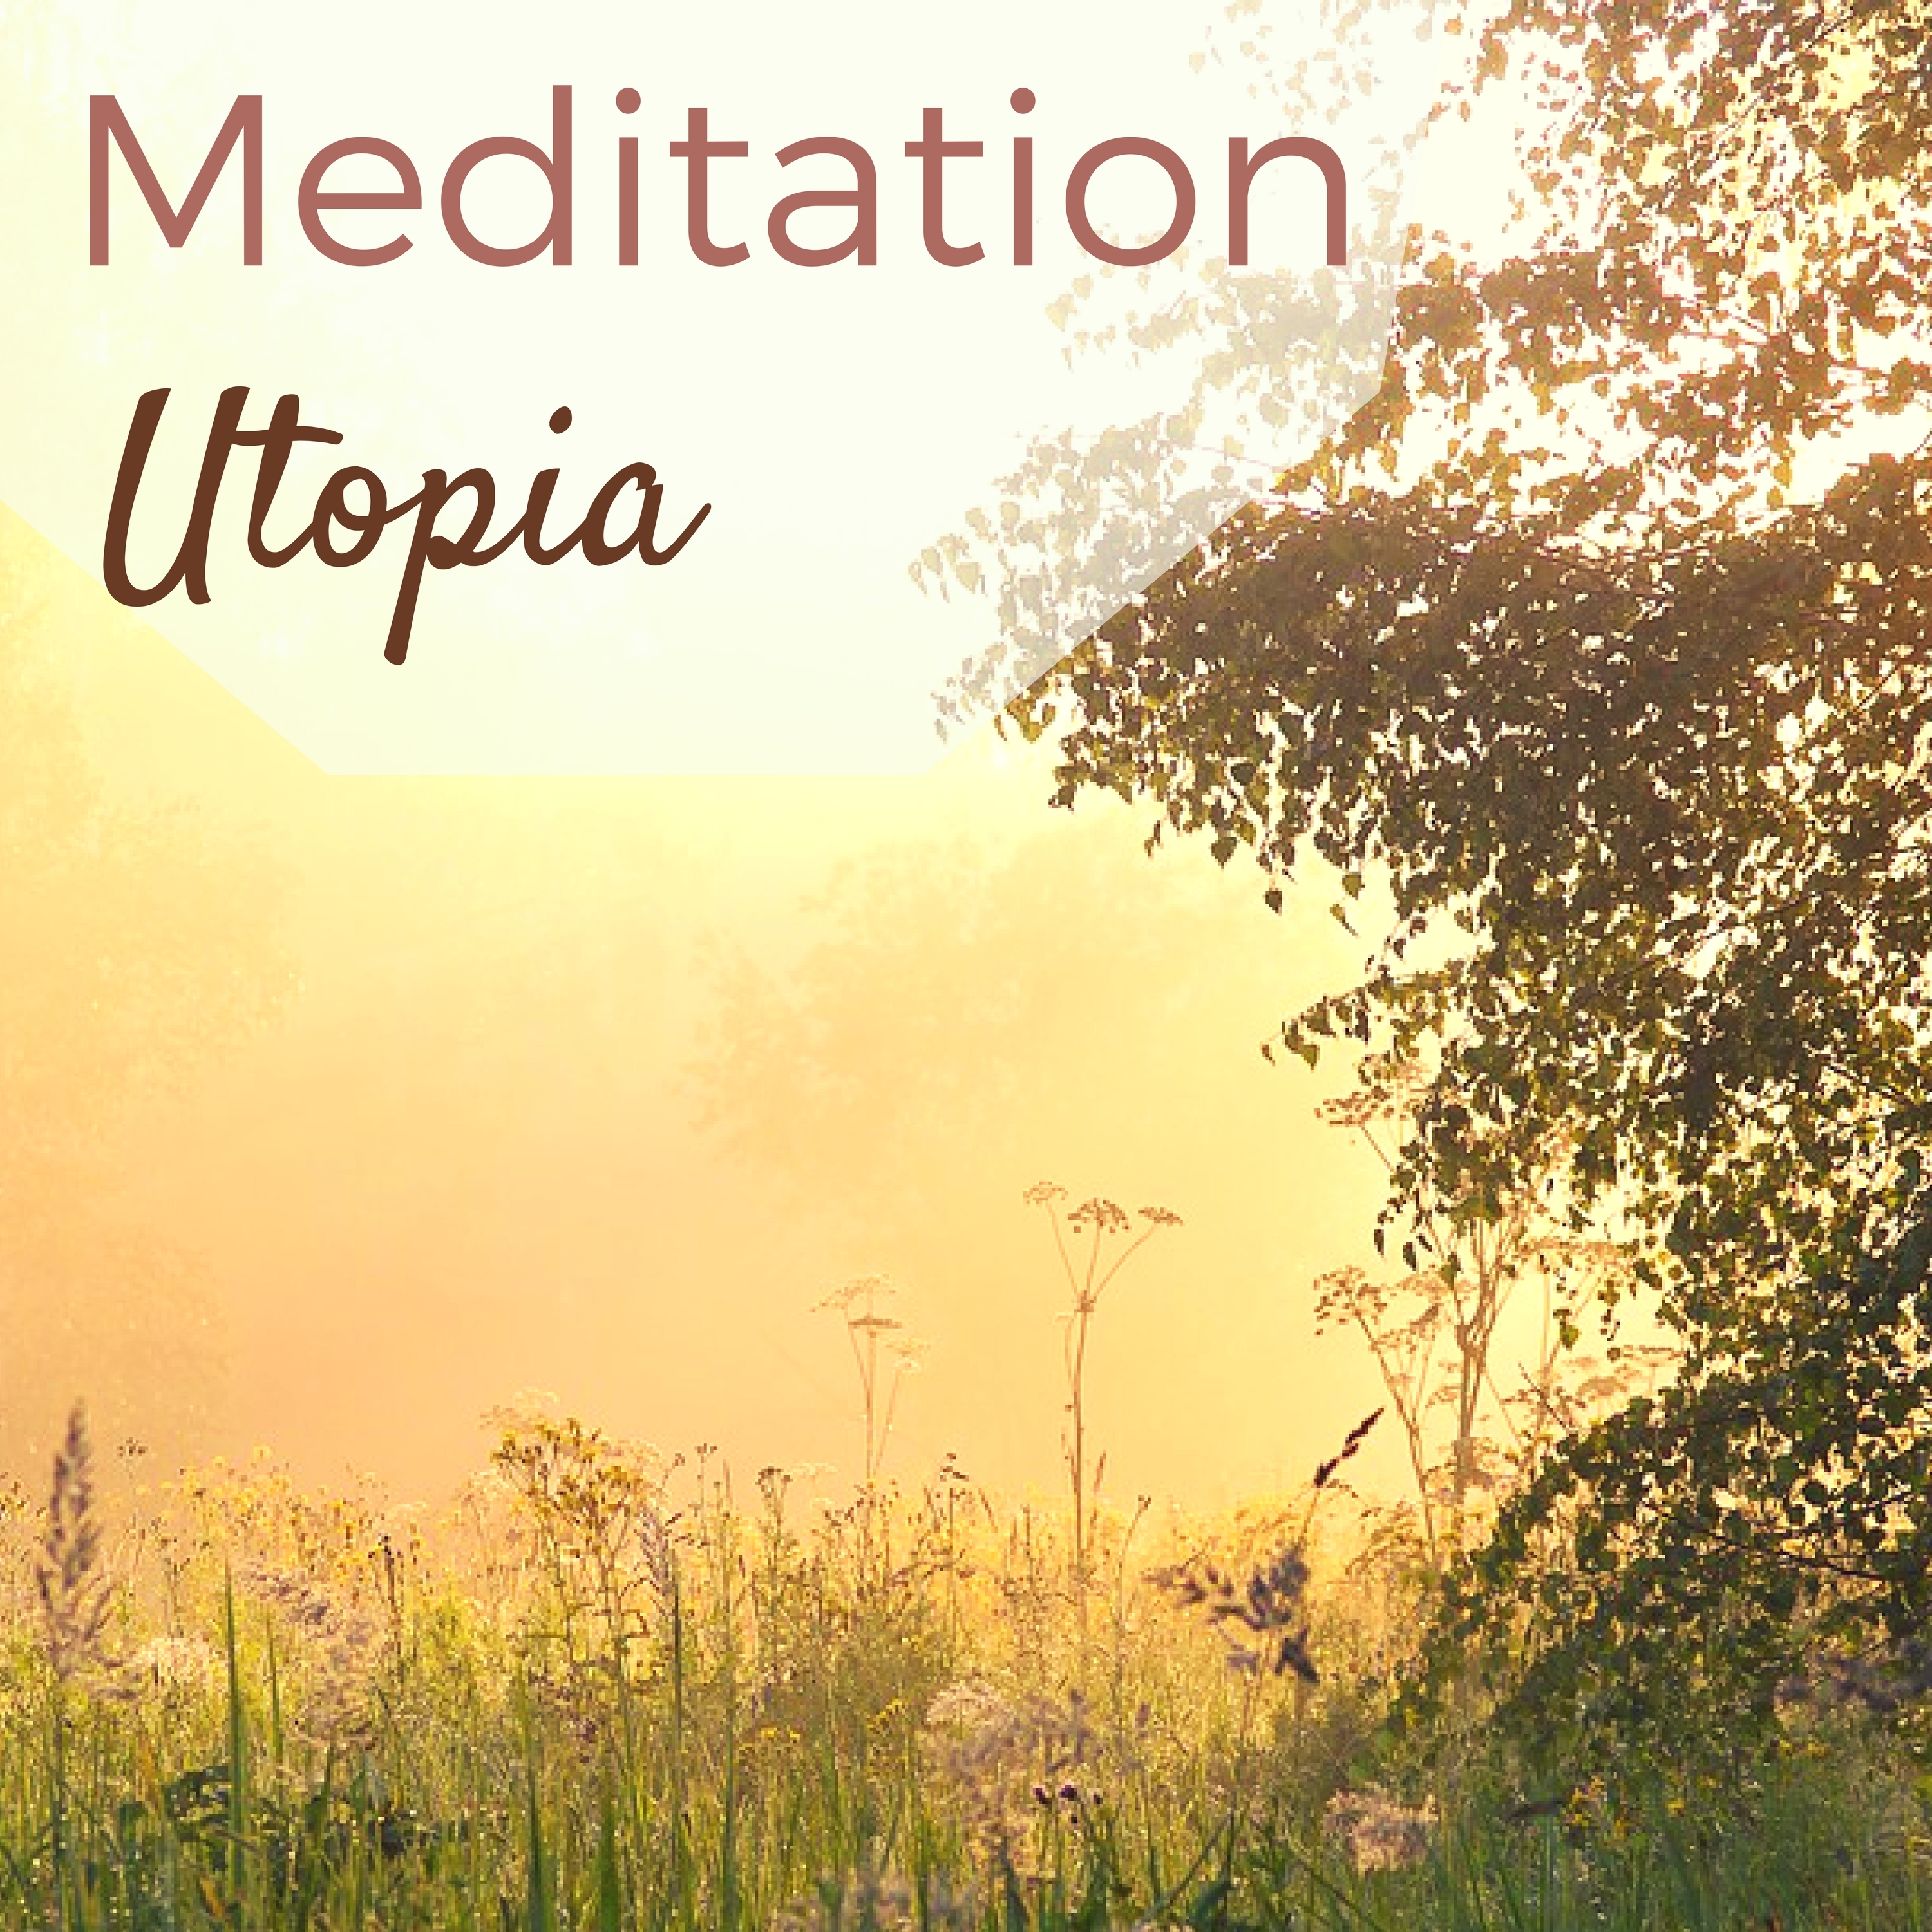 Meditation Utopia - Tranquility Oasis of Peace, Background Music for Mindfulness